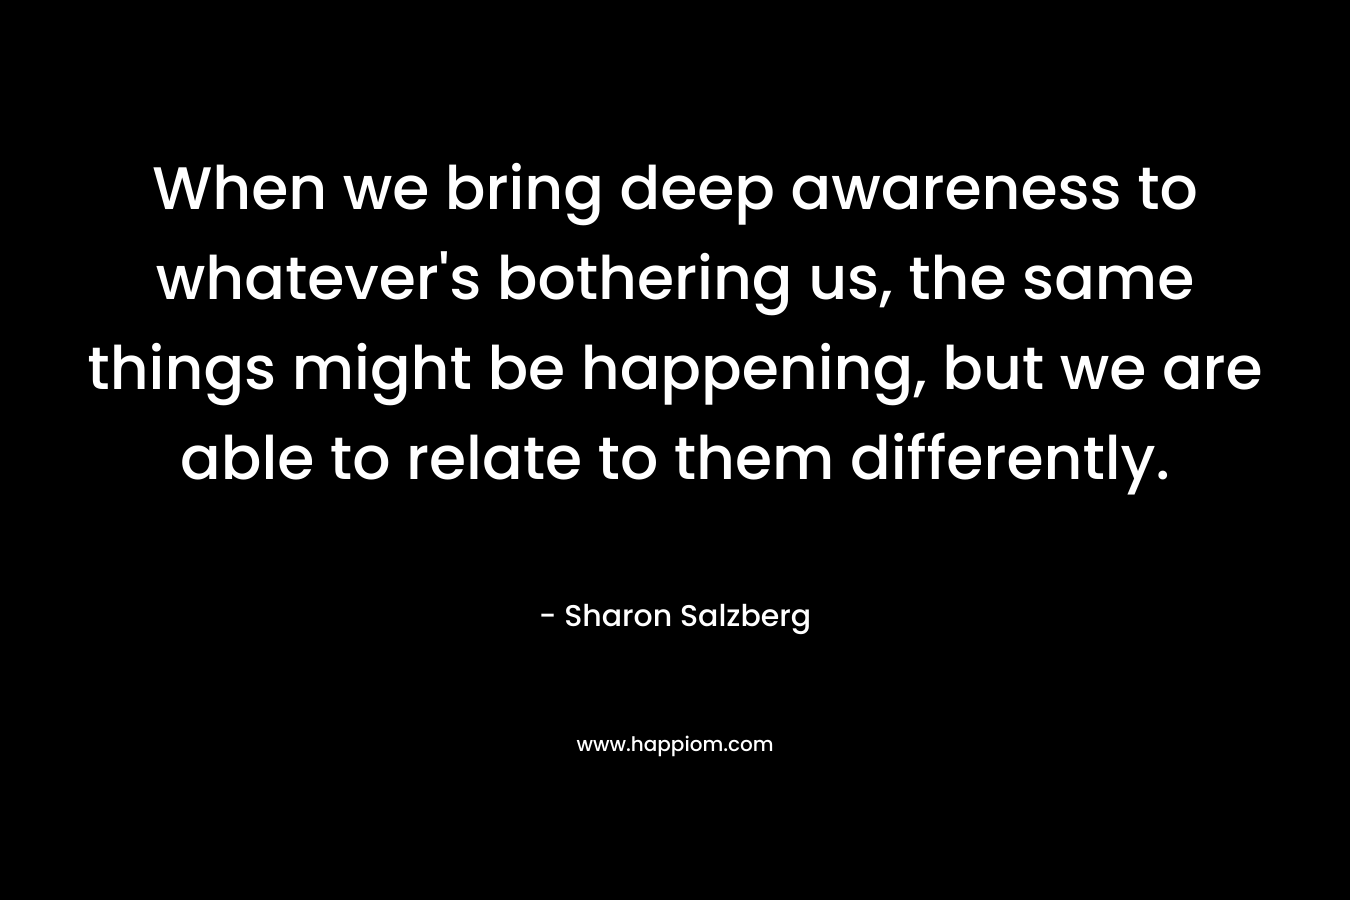 When we bring deep awareness to whatever's bothering us, the same things might be happening, but we are able to relate to them differently.